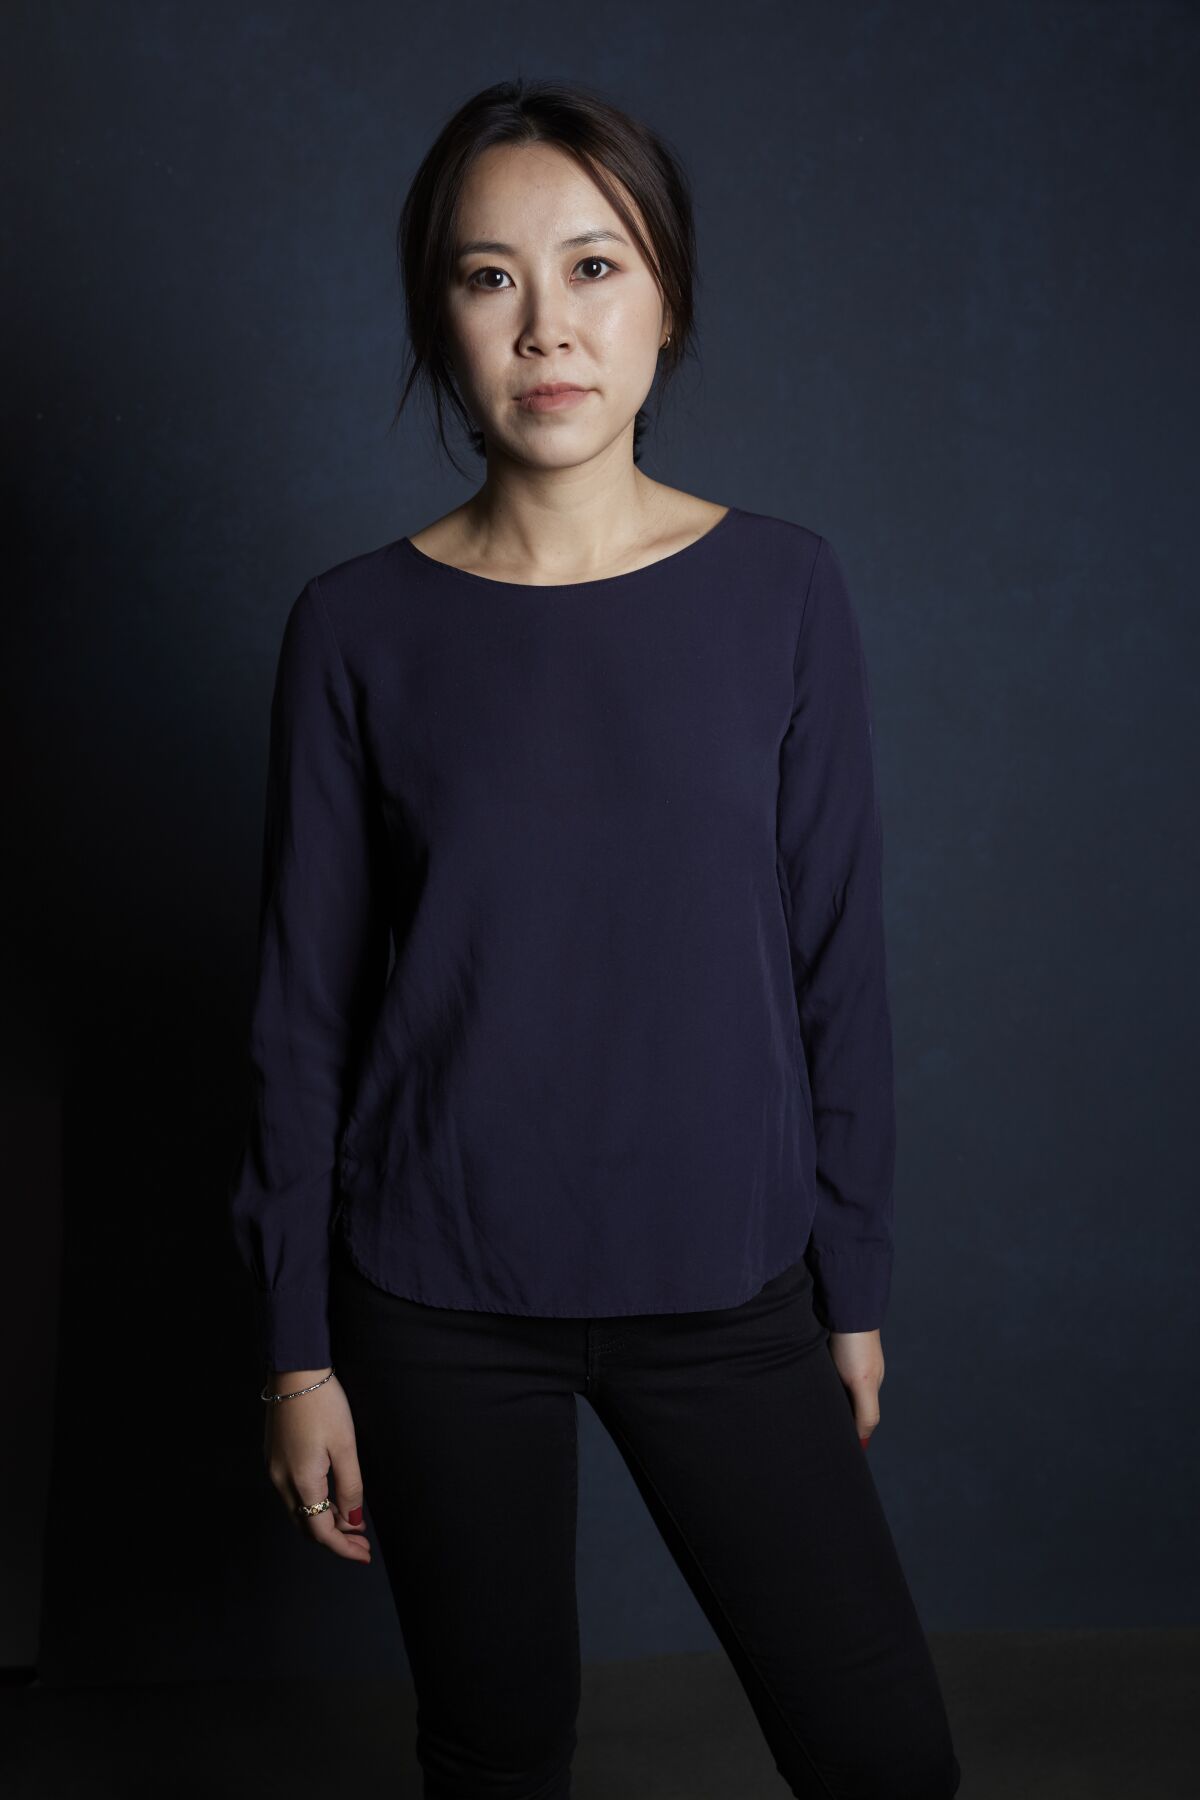 Susie Yang, author of "White Ivy."